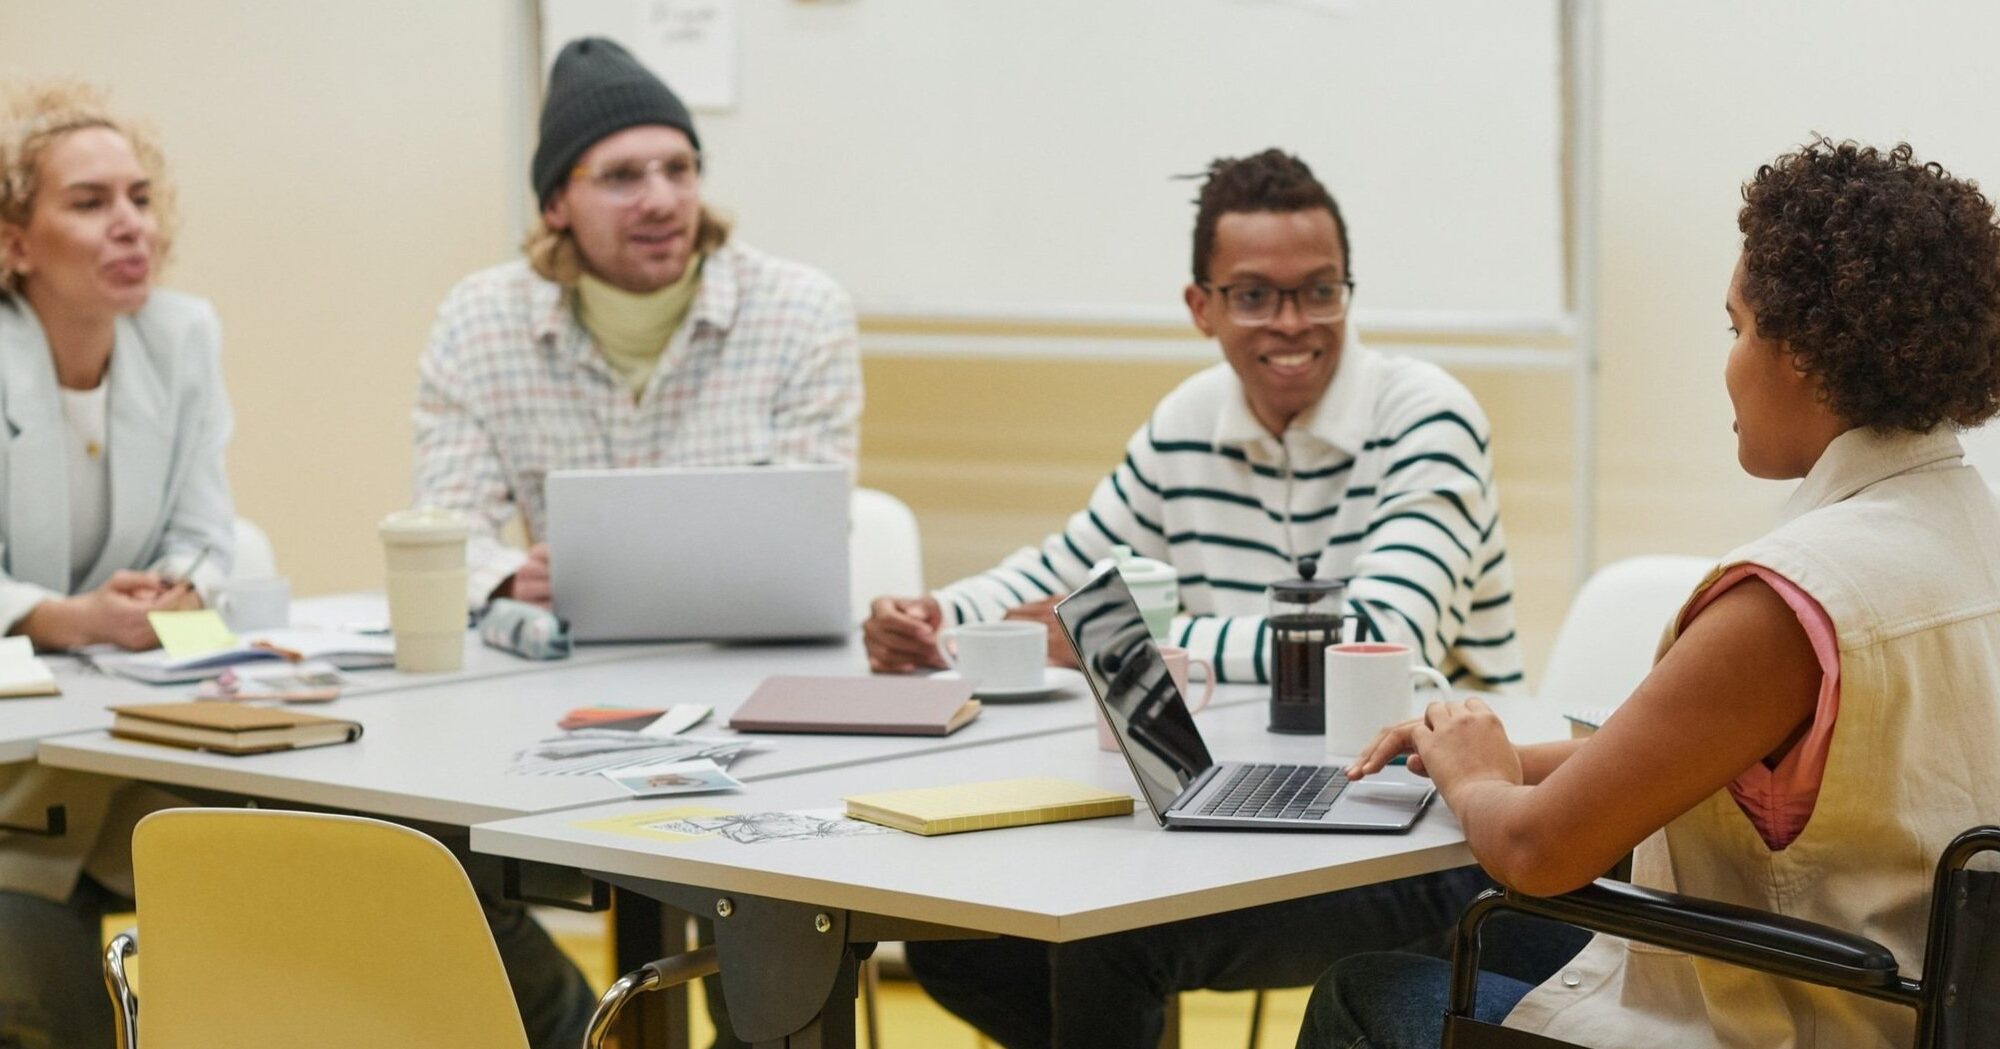 Diverse group of coworkers planning an event. From right to left: a blond white female, a blonde white male, a Black male with glasses, and a Black female seated in a wheelchair.